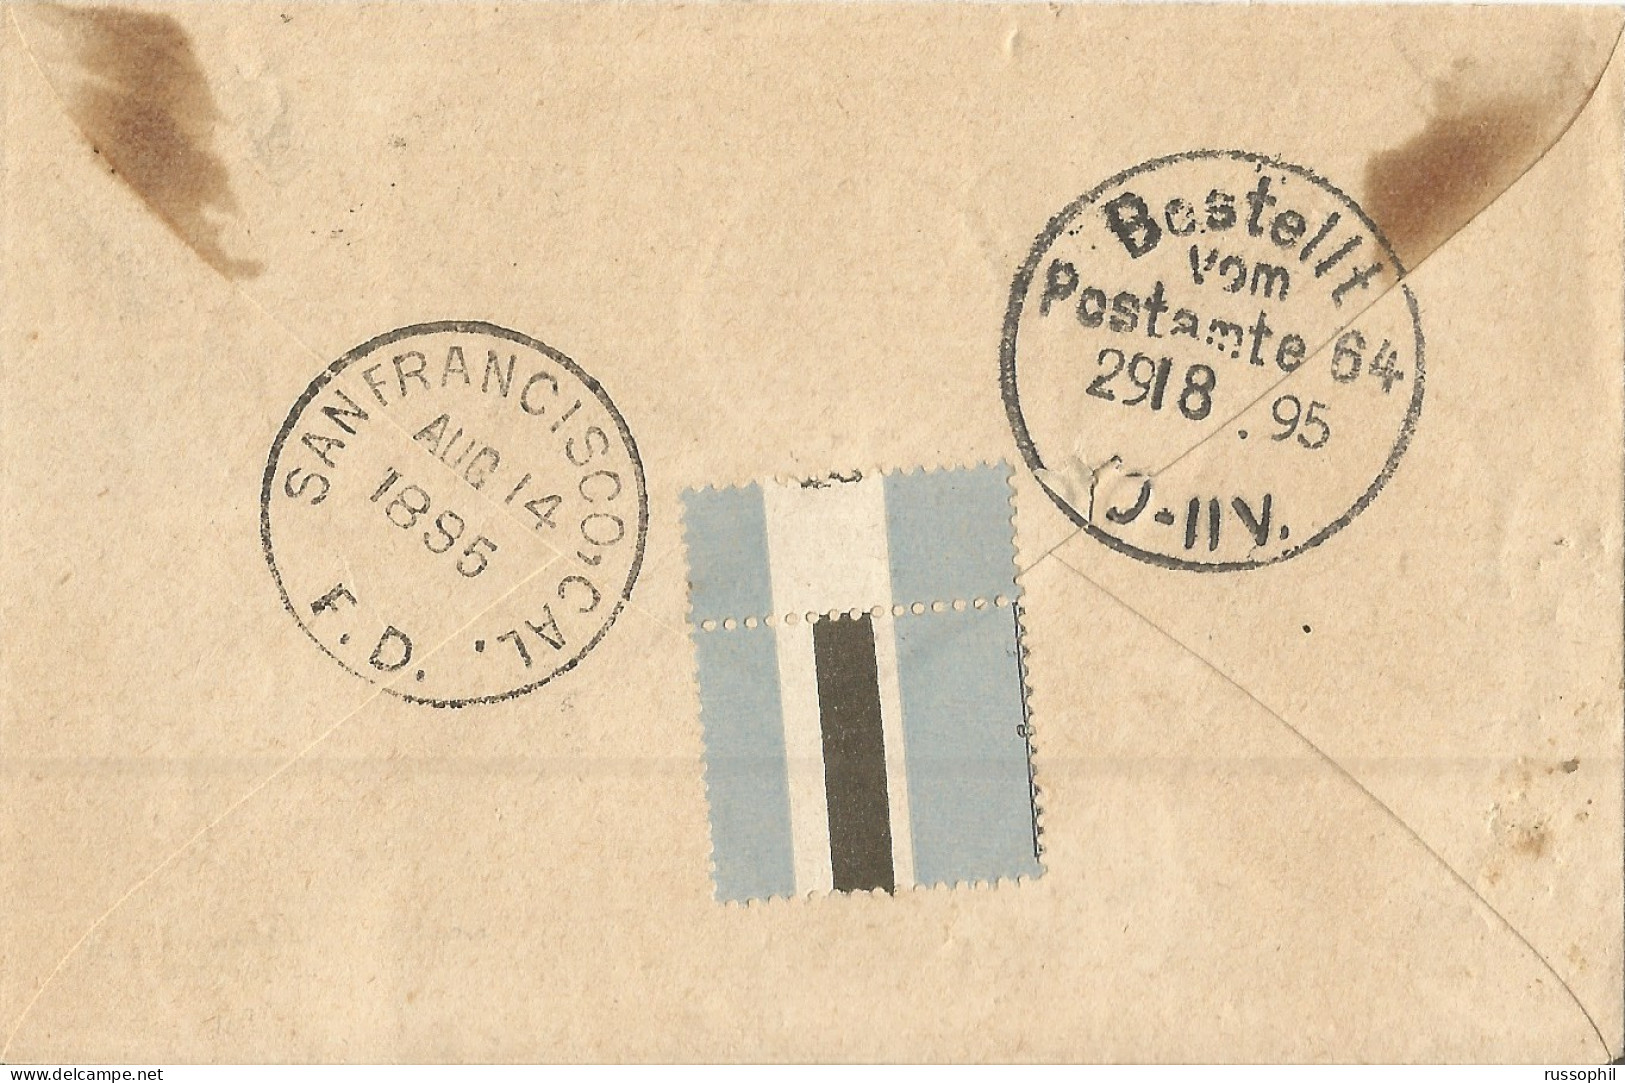 OCEANIE -  5 STAMP 20 CENT. UPRATED 5 CENT. POSTAL STATIONERY COVER FROM PAPEETE TO GERMANY - 1895 - Lettres & Documents